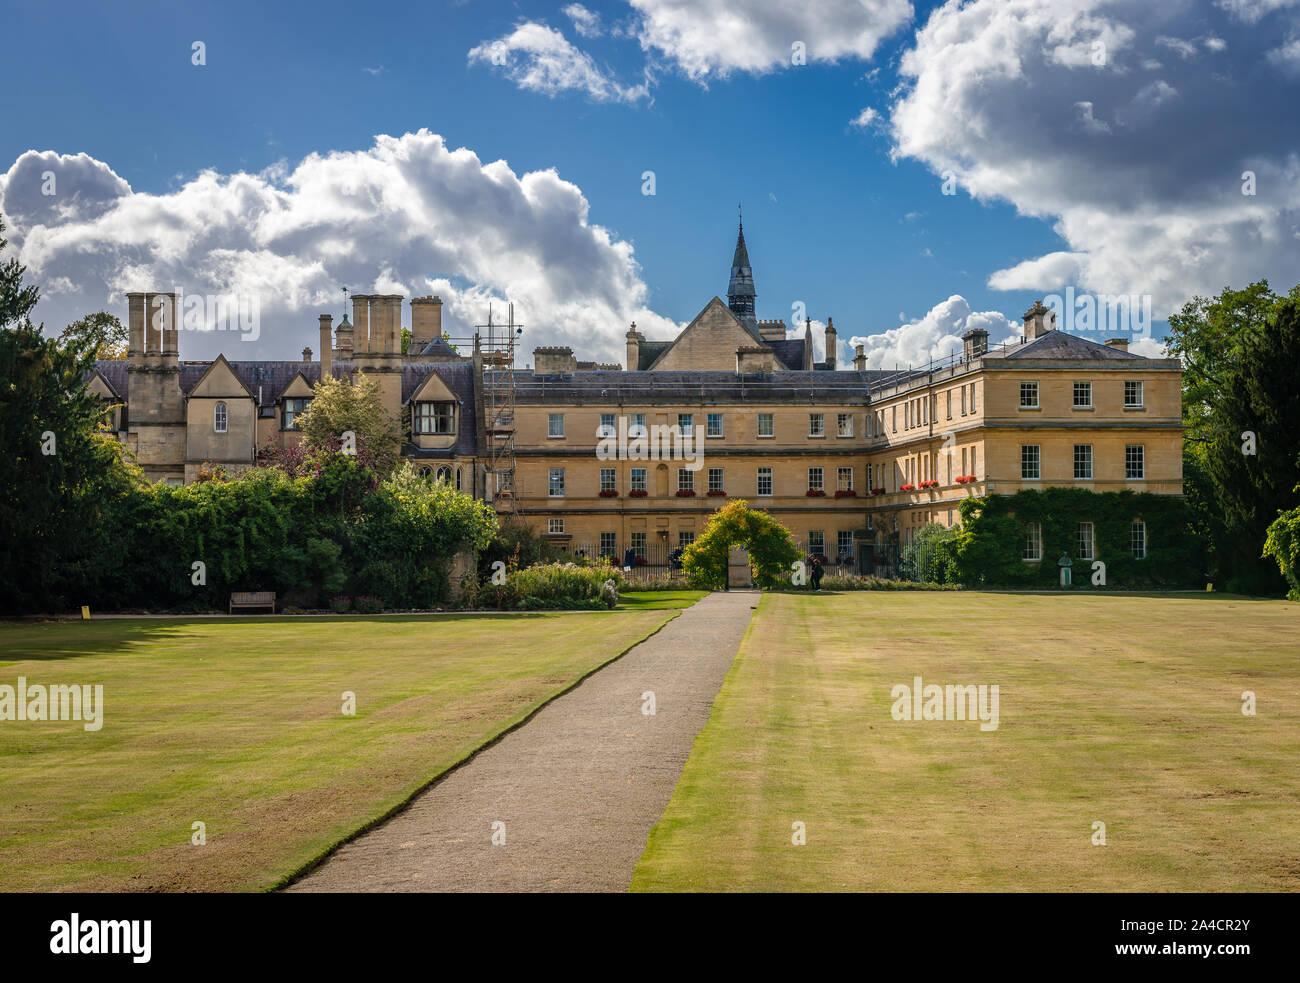 Hinterrasen des Trinity College (vollständiger Name: Das College of the Holy and Undivided Trinity in the University of Oxford) in Oxford, Großbritannien. Stockfoto